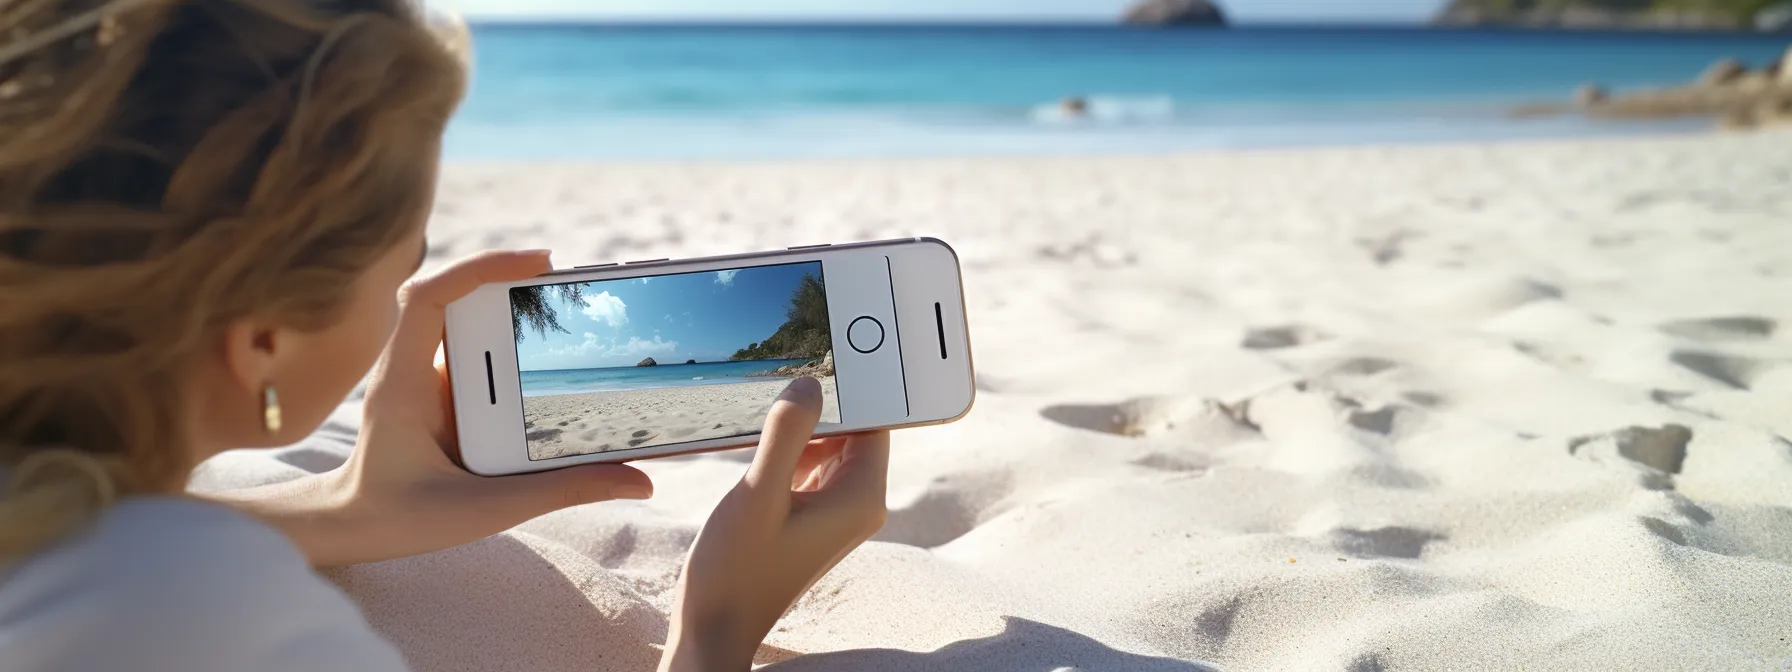 A woman is enjoying her time while capturing a picture with her cell phone on the beach.